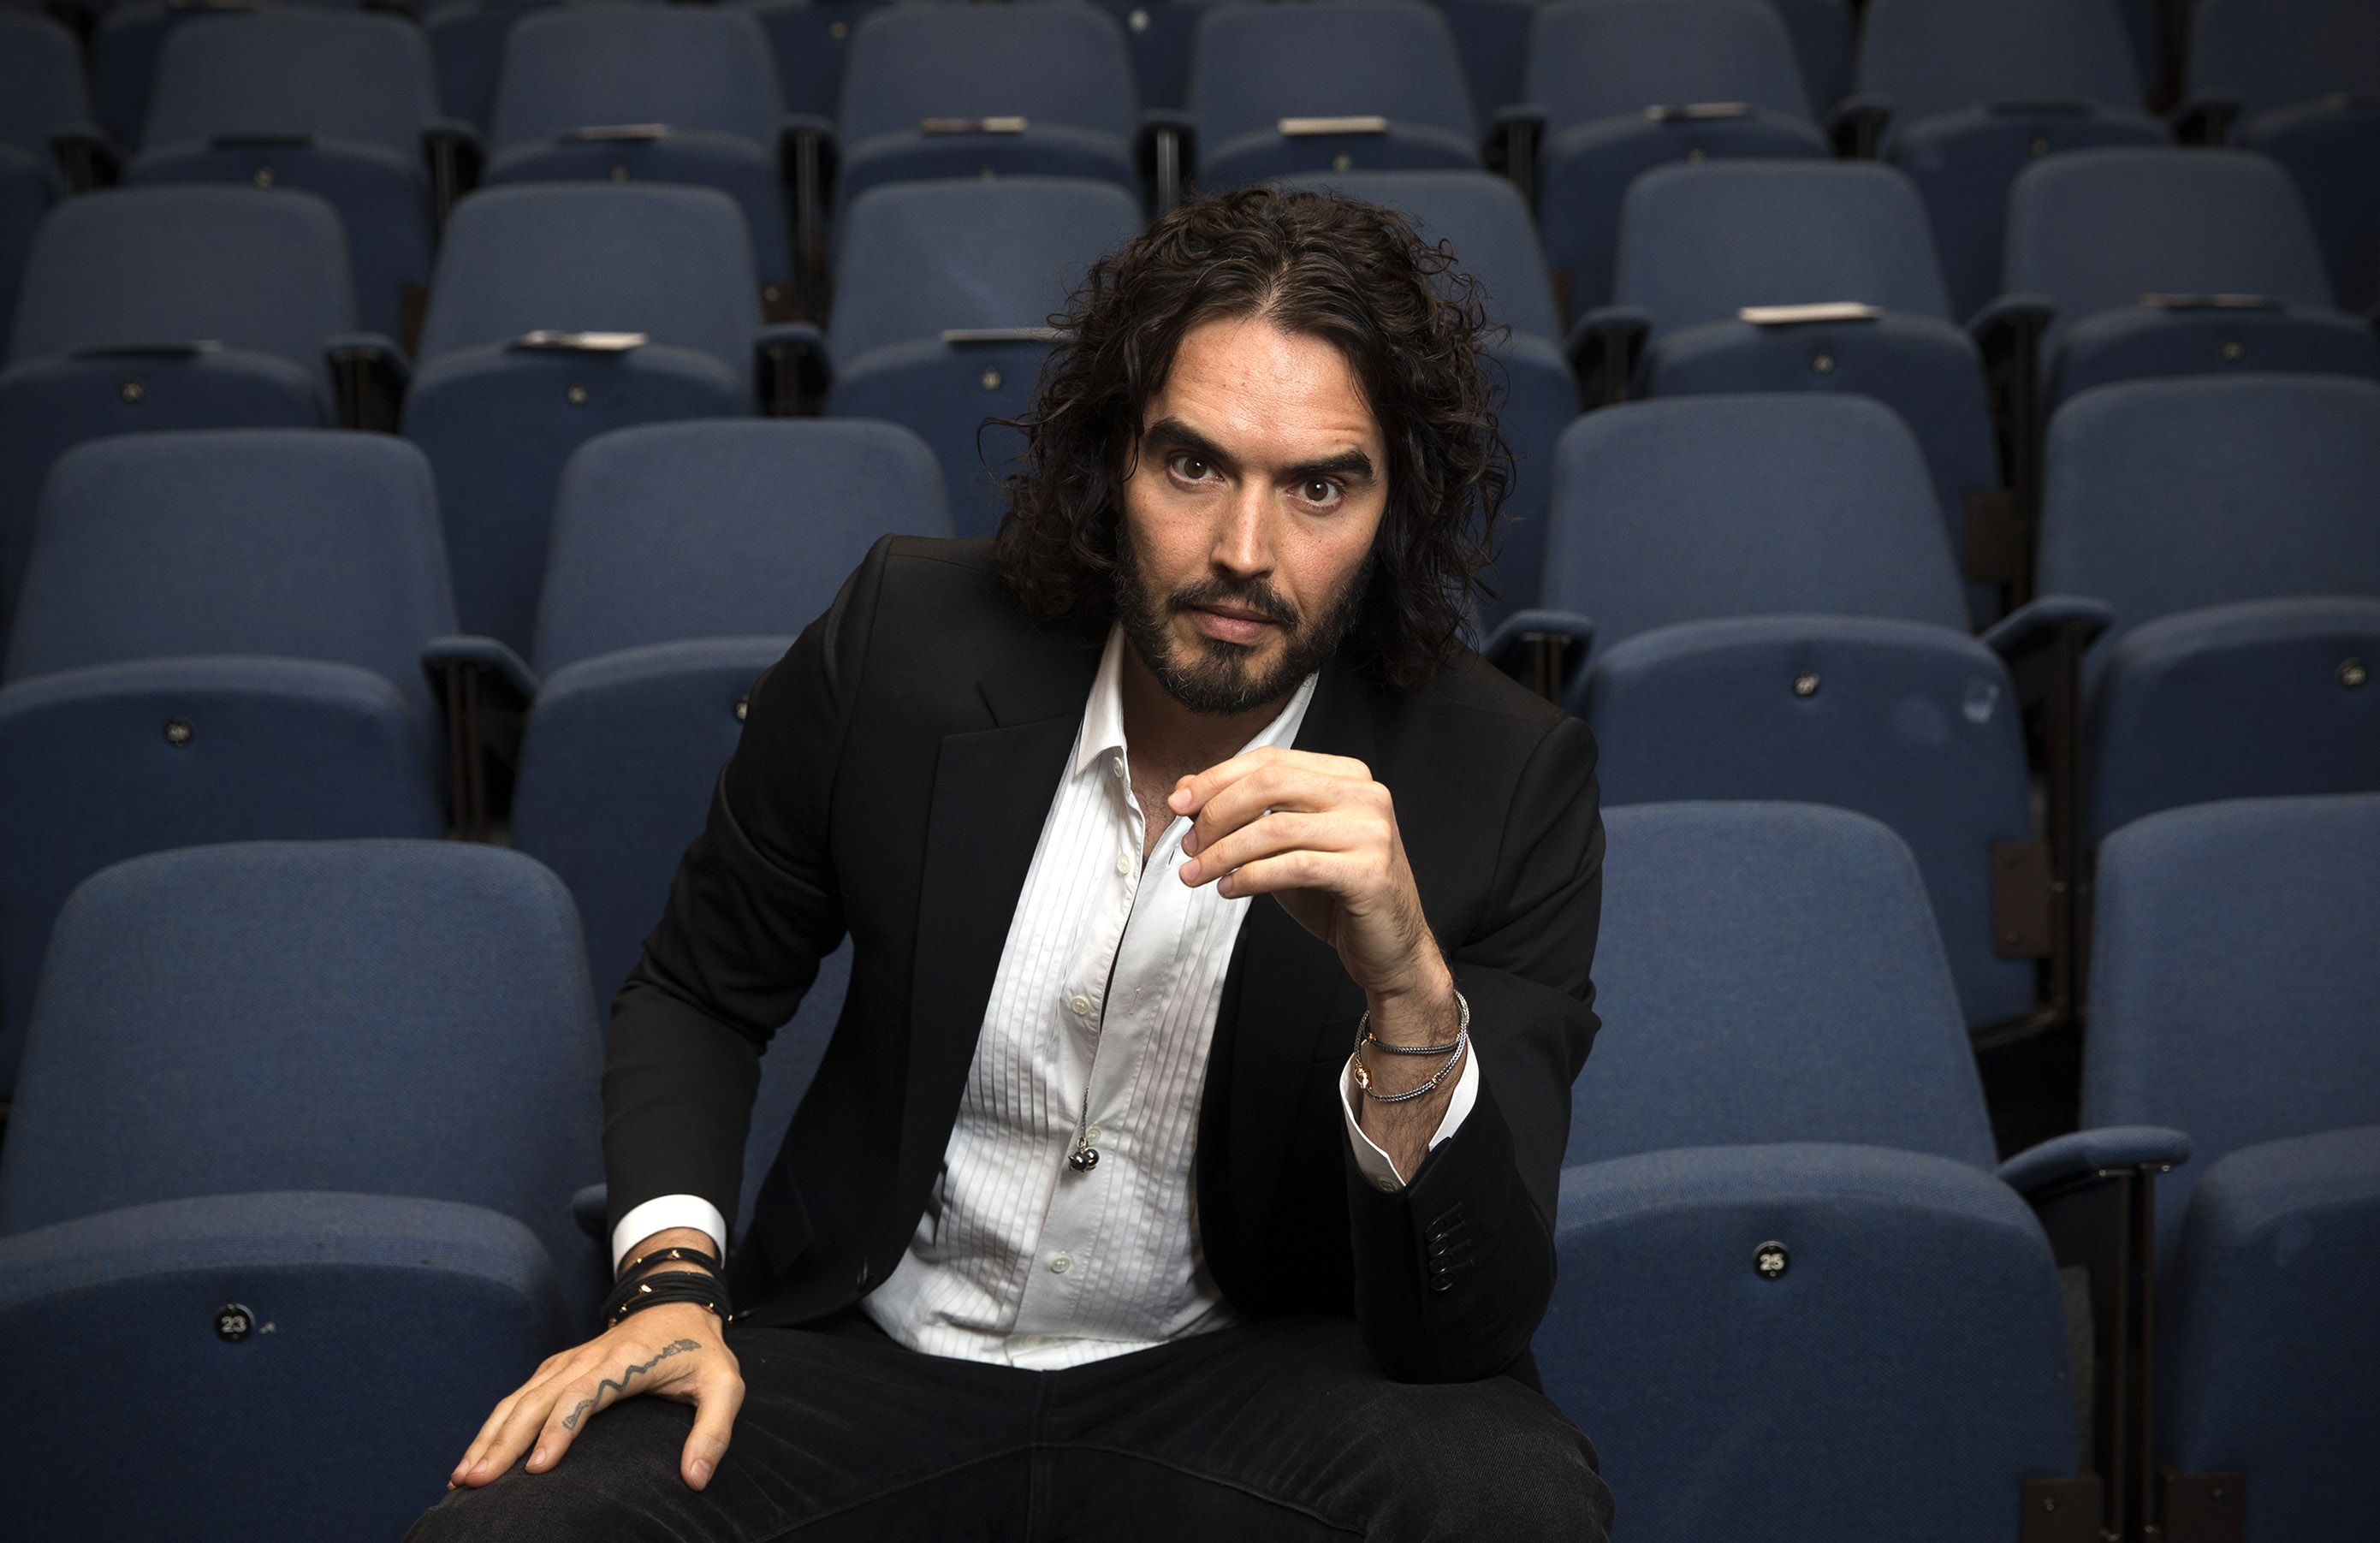 Russell Brand on Nov. 25, 2014 in London. (Carl Court—Getty Images)